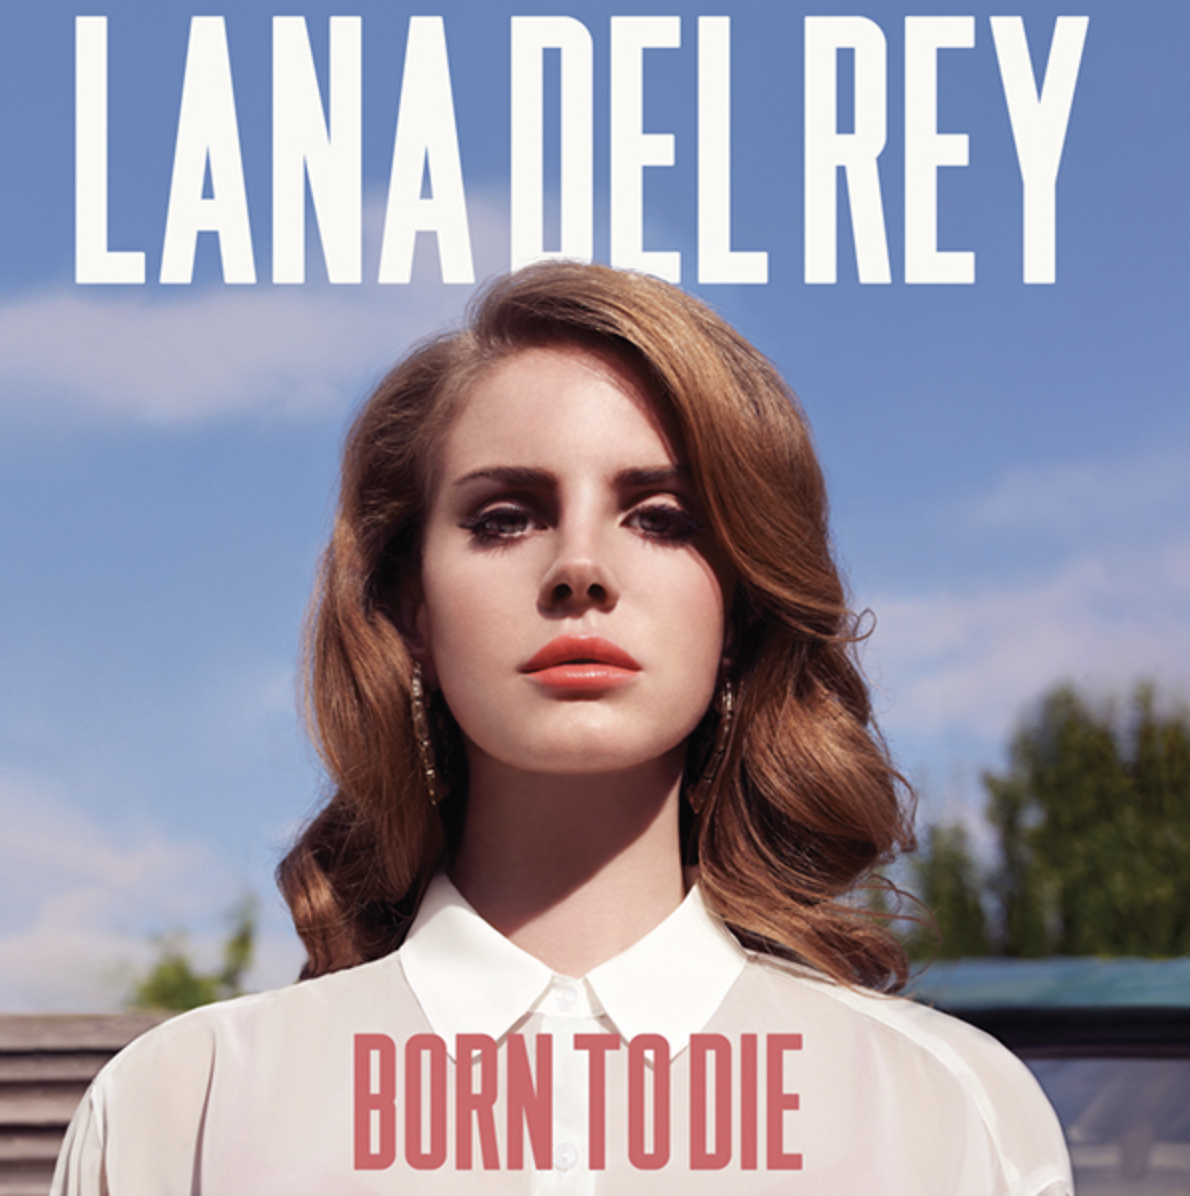 cover for &quot;Born to die,&quot; where she wears a peter pan collar shirt, wavy hair, hoop earrings, stares us down